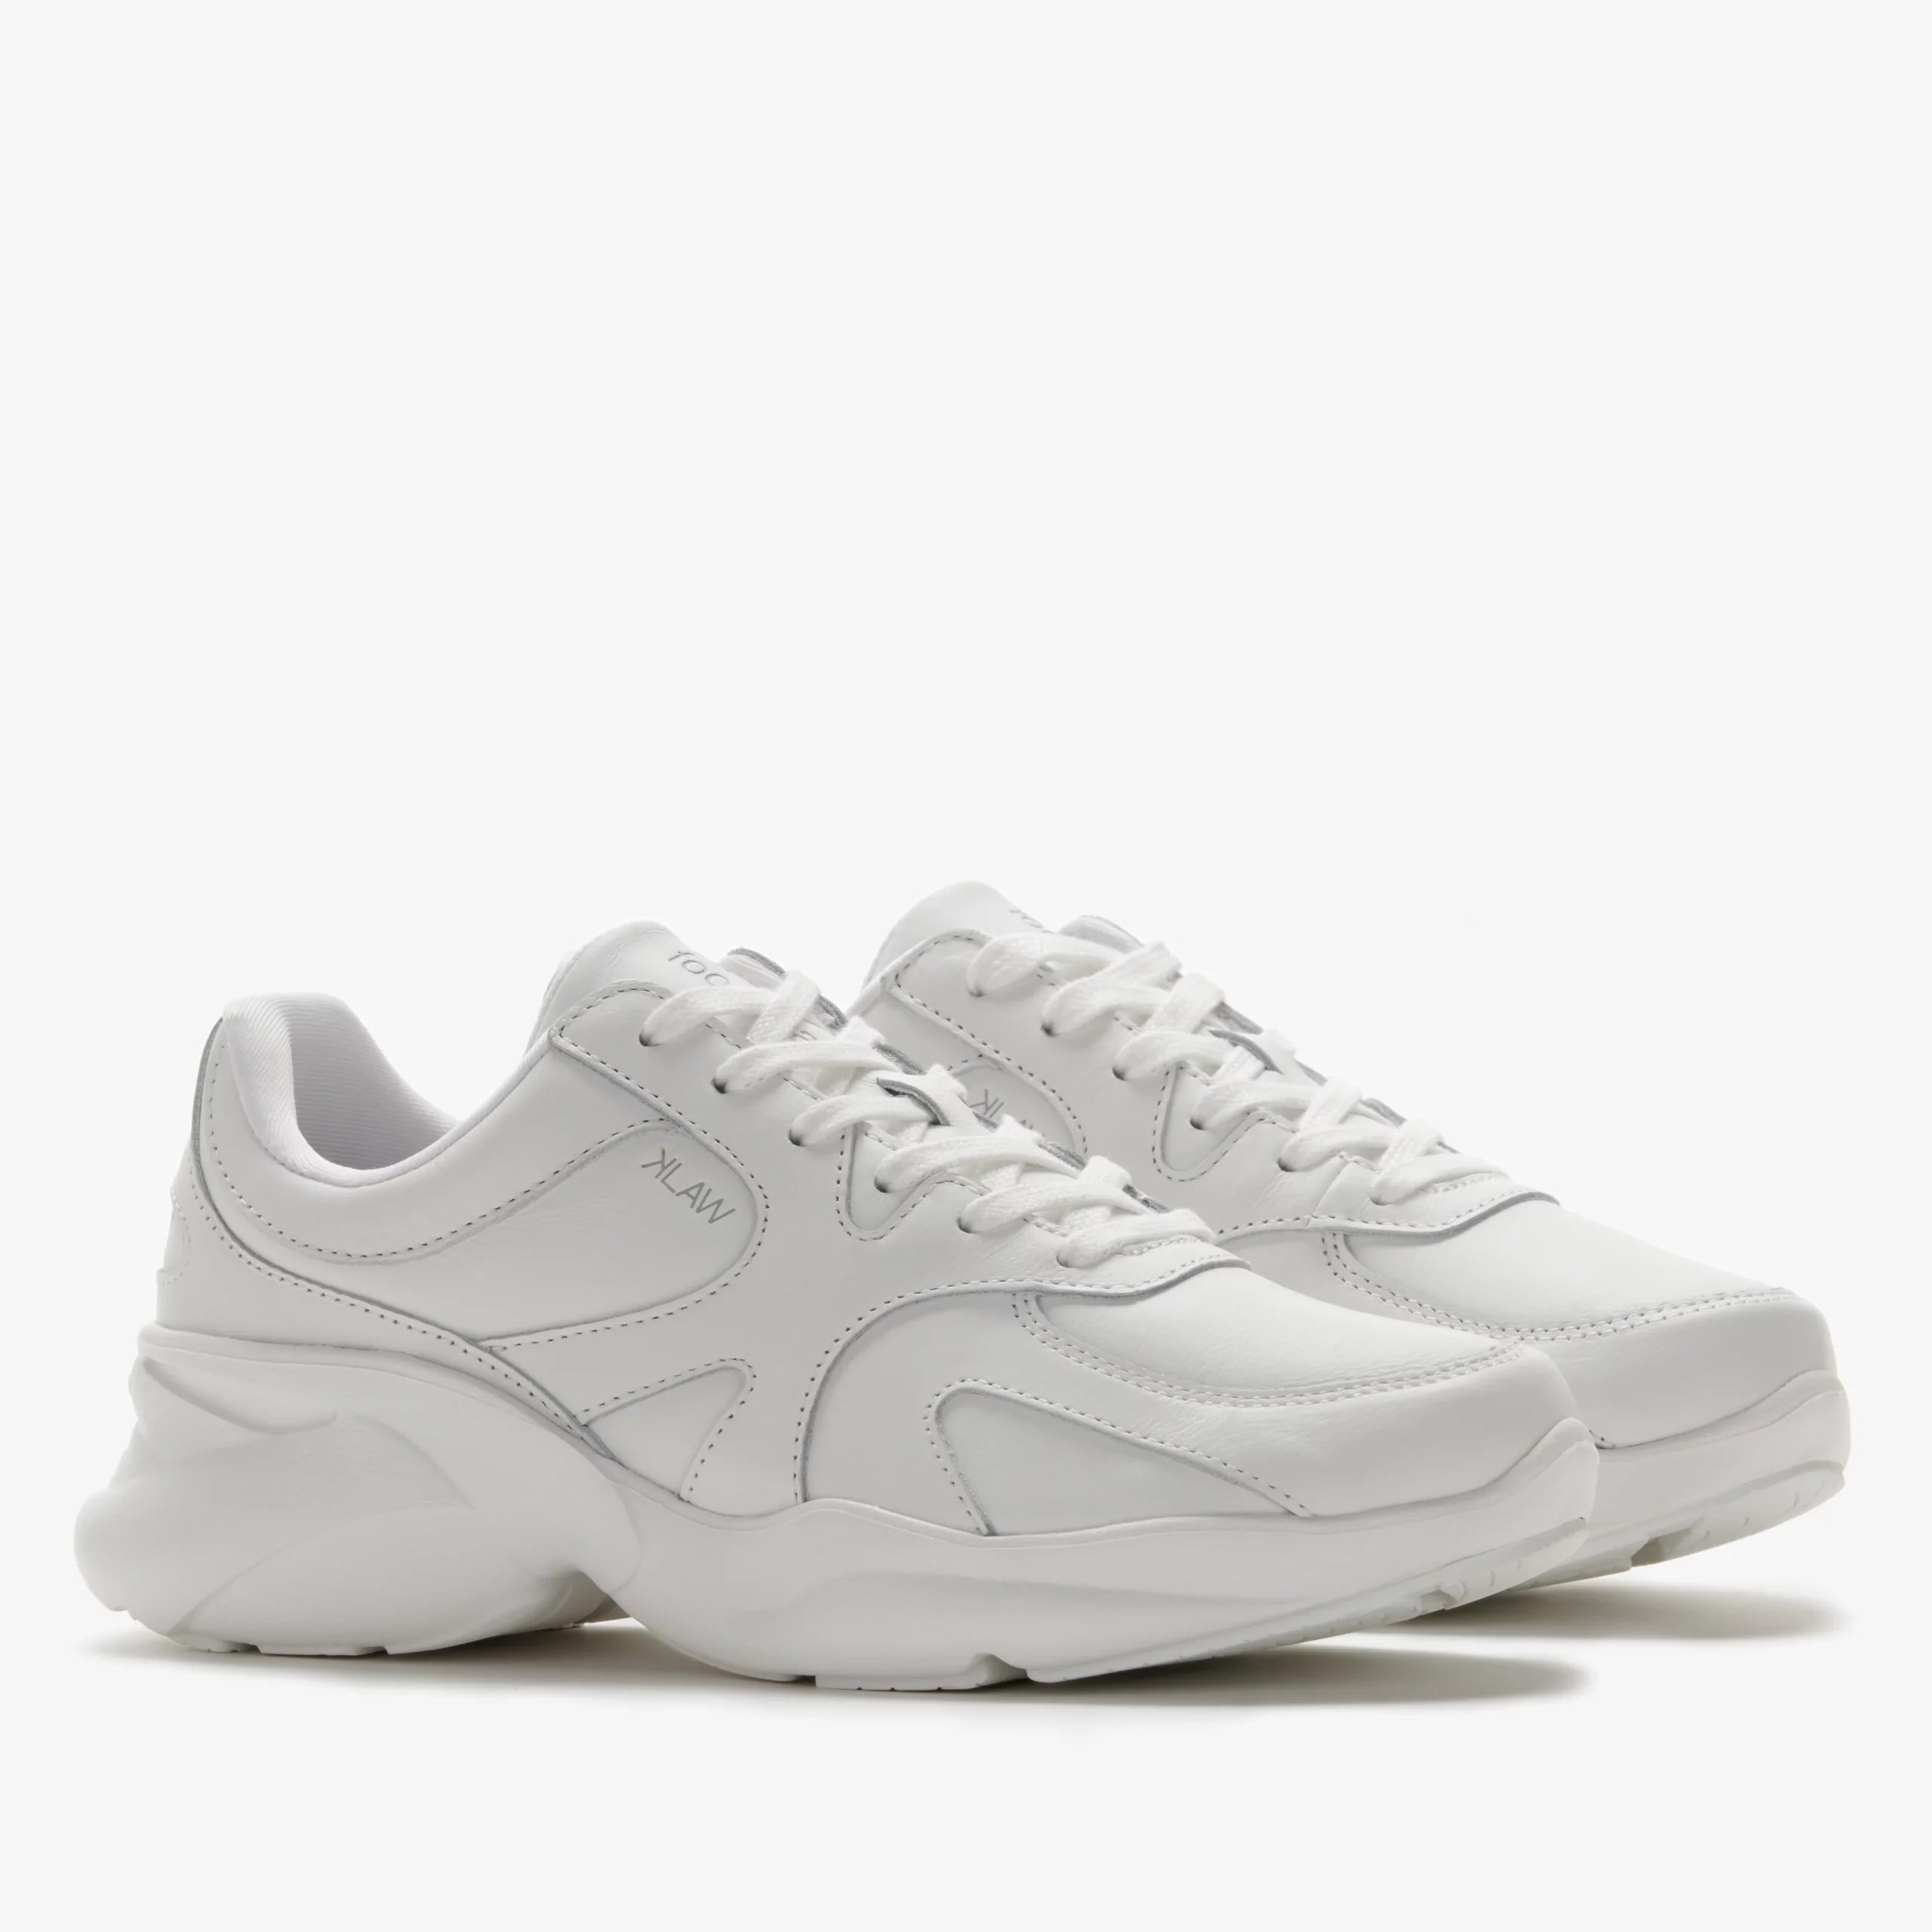 White Klaw tennis shoes good for walking with great arch support